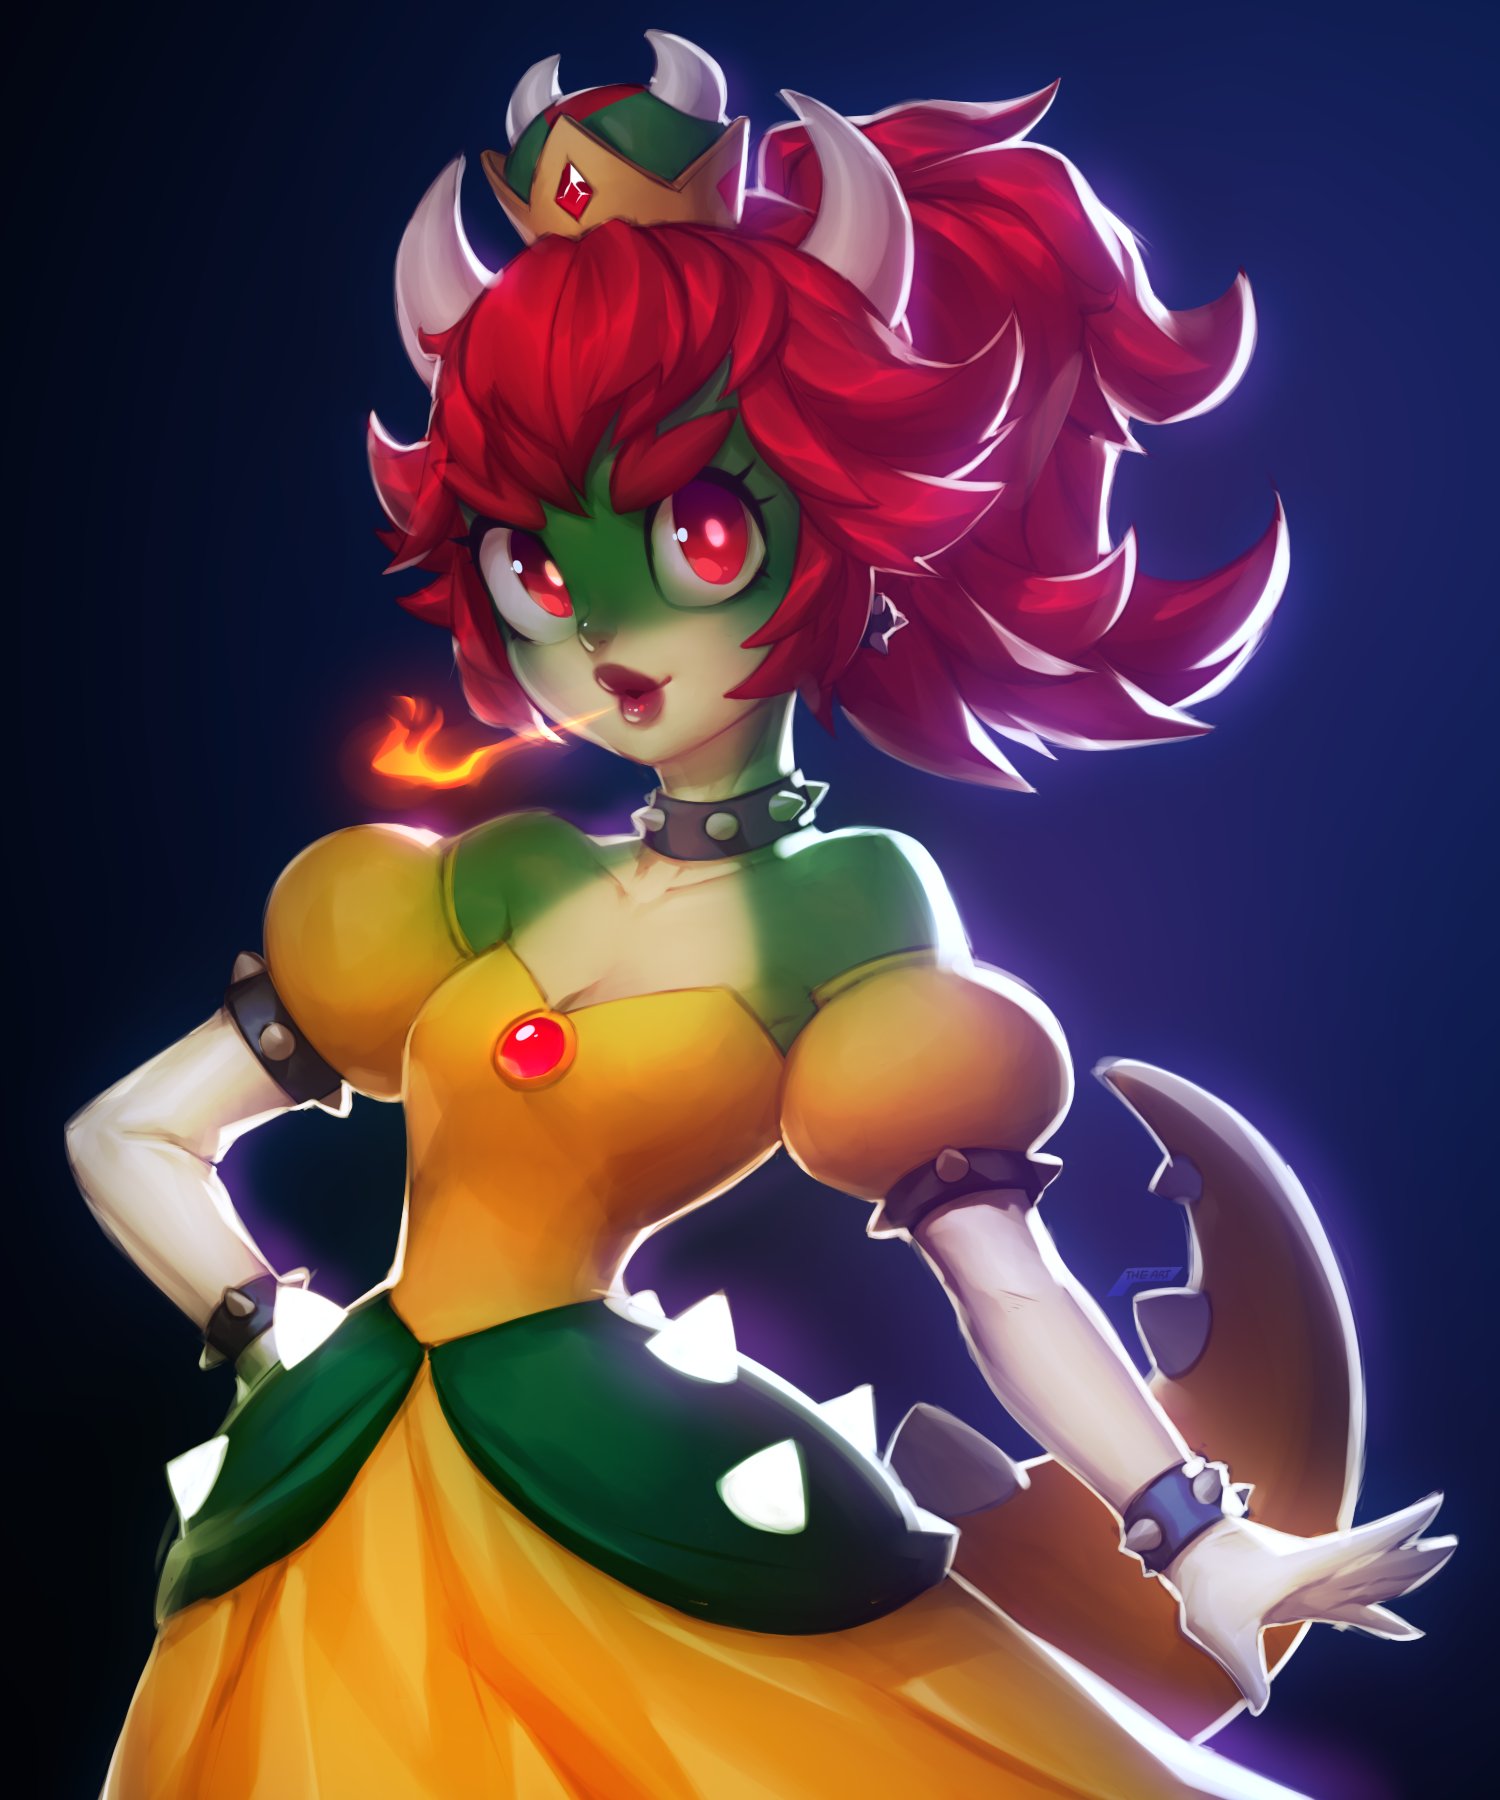 239. Here's my take on Princess Bowser AKA Bowsette :D. 